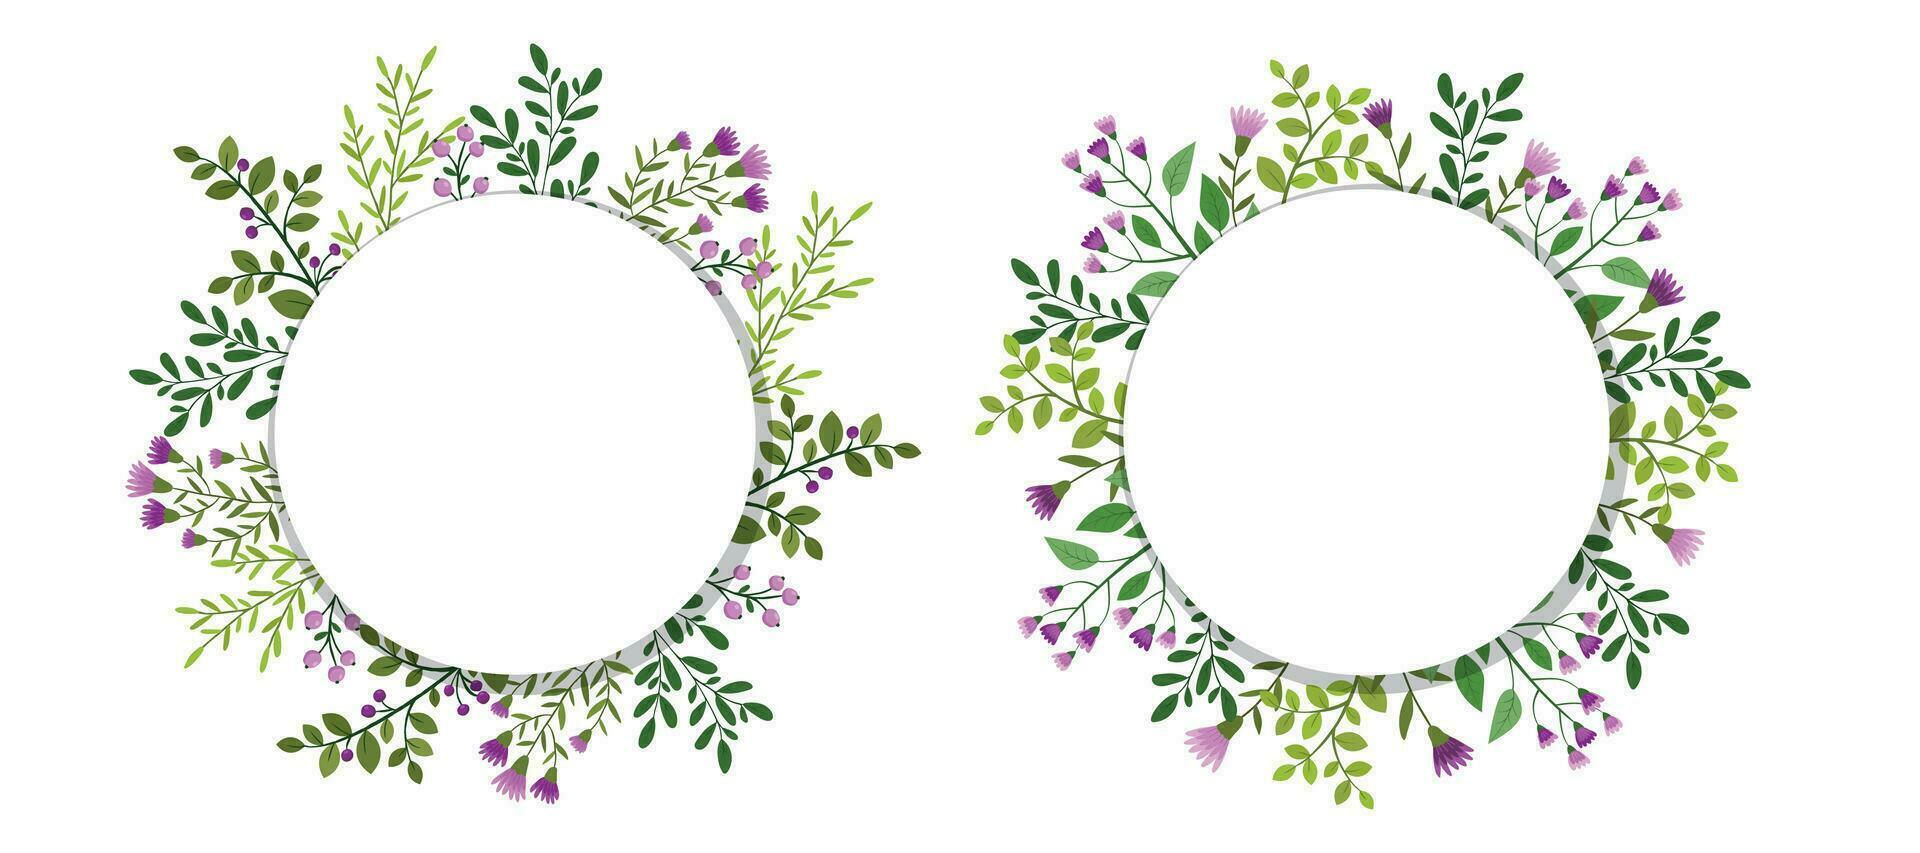 Set cute hand drawn frames with floral elements, herbs, leaves, flowers, twigs. Vector illustration for wedding design, logo and greeting card.